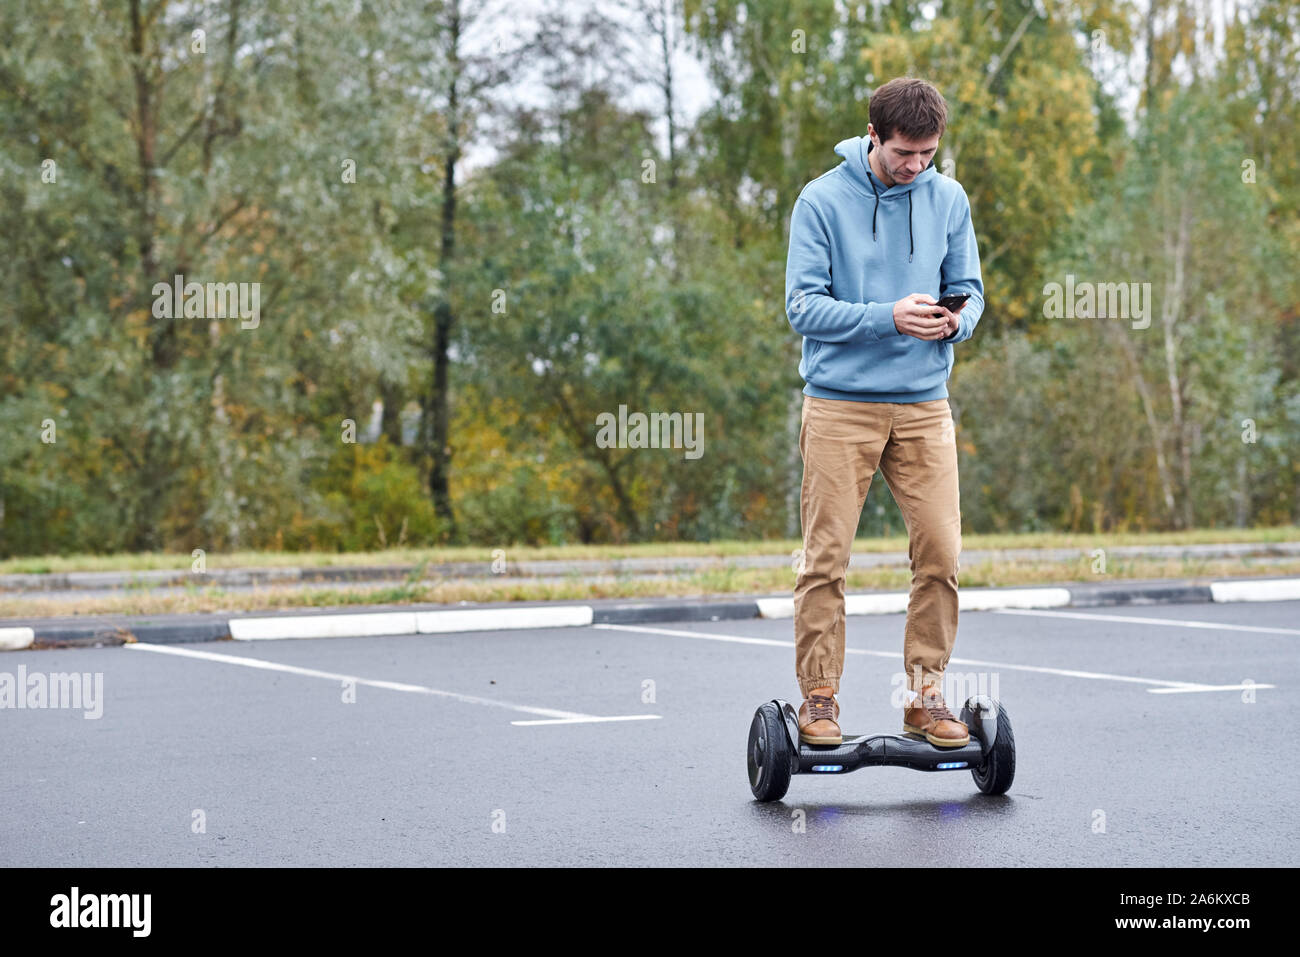 Man riding on hoverboard and using smartphone outdoor Stock Photo - Alamy